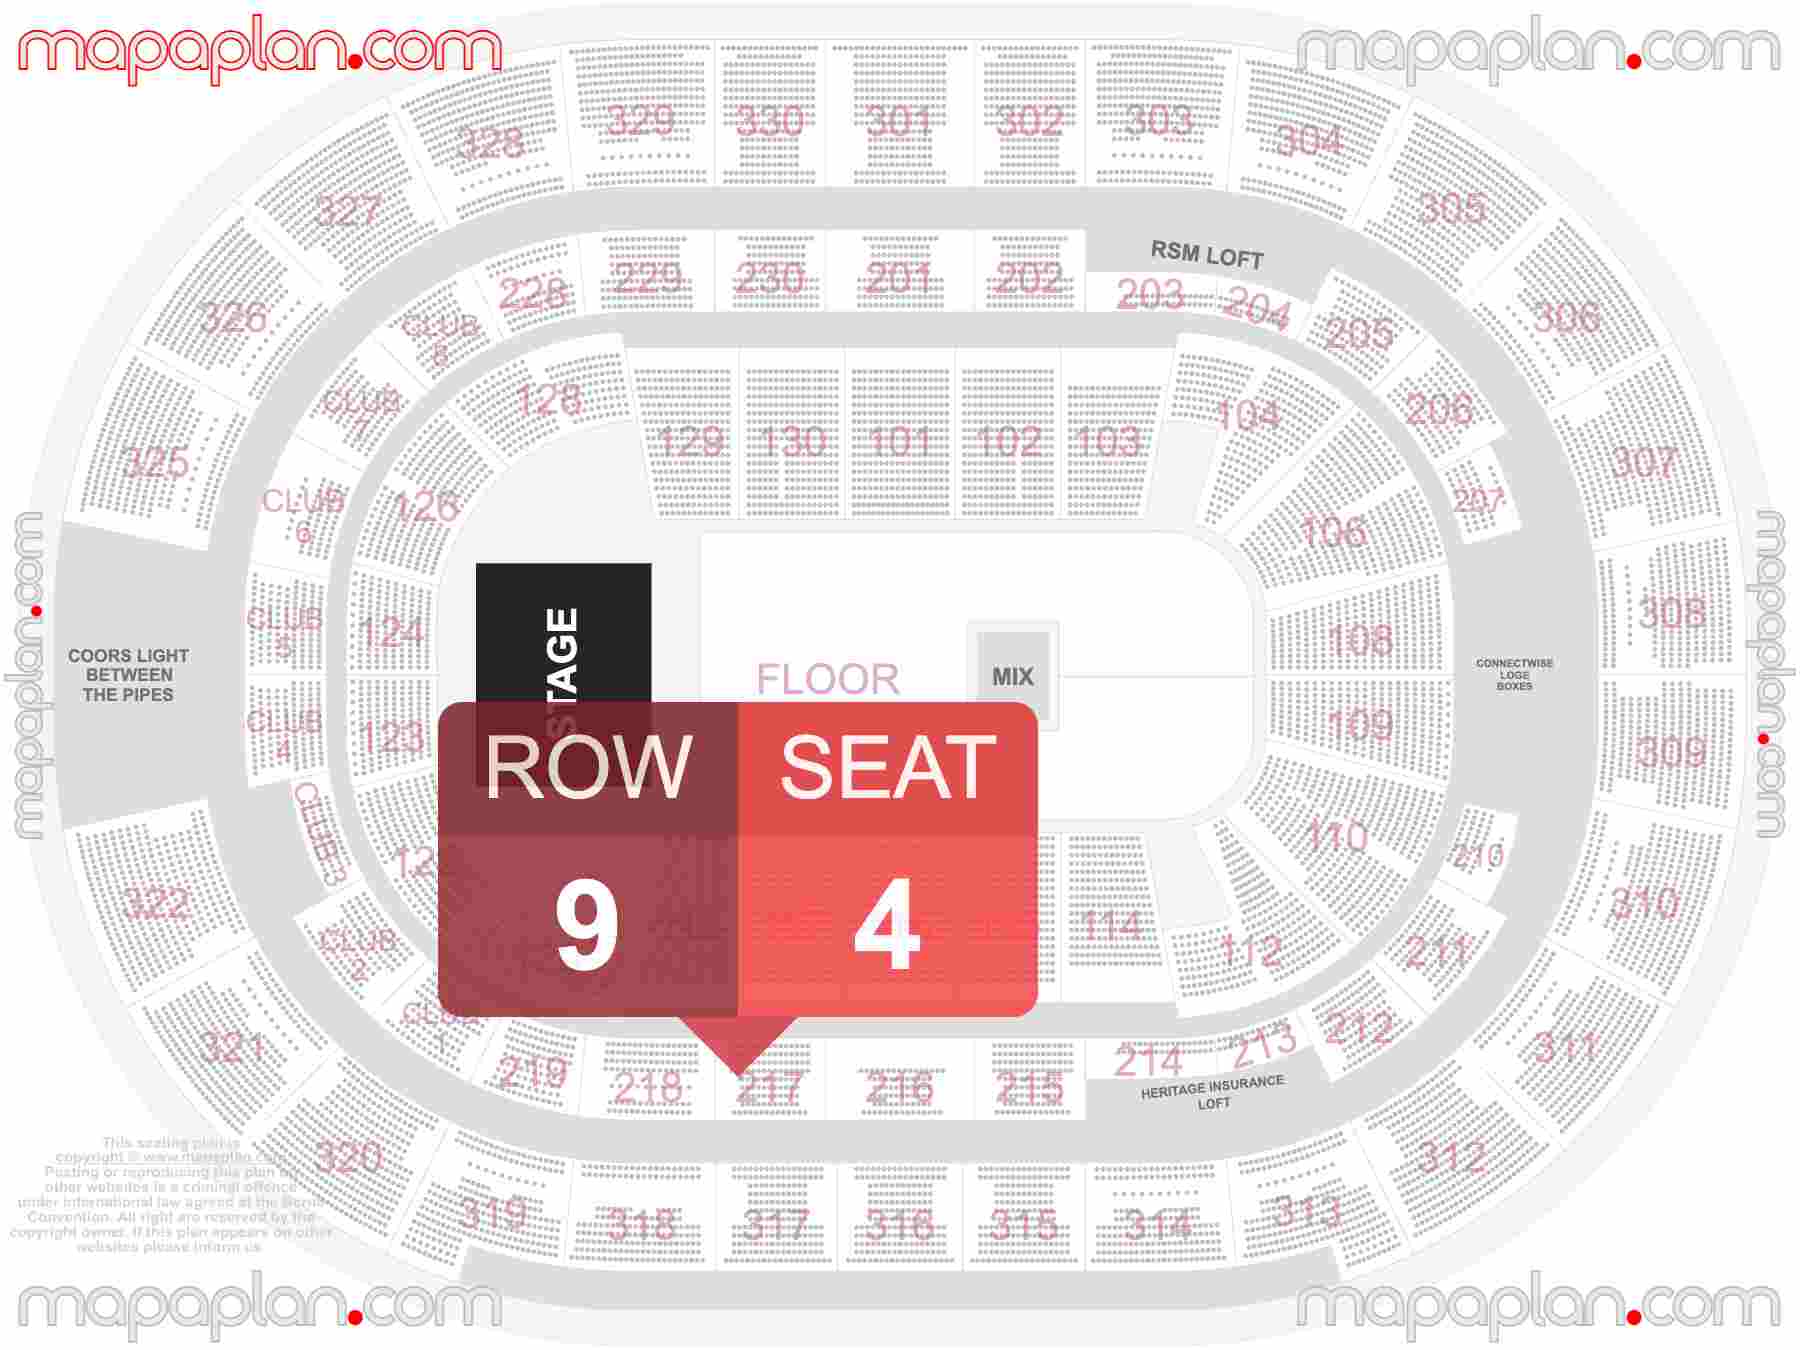 Tampa Amalie Arena seating chart Concert with floor general admission standing interactive seating checker map plan showing seat numbers per row - Ticket prices sections review diagram